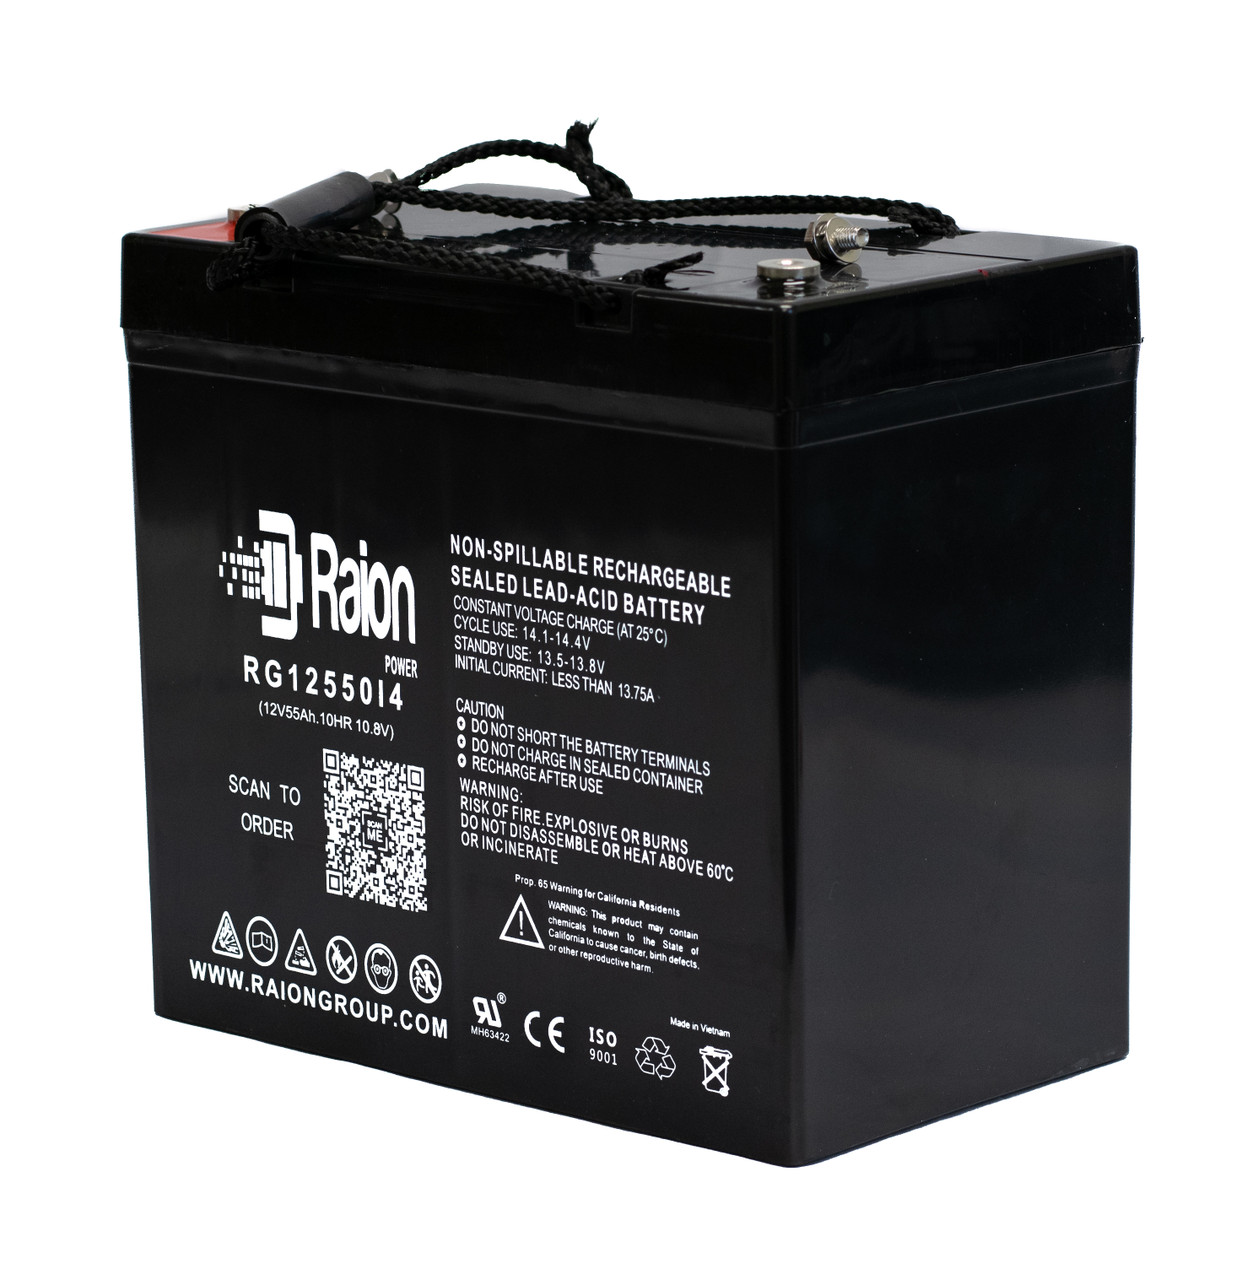 Raion Power 12V 55Ah 22NF Mobility Scooter Battery Replacement for Invacare Excel